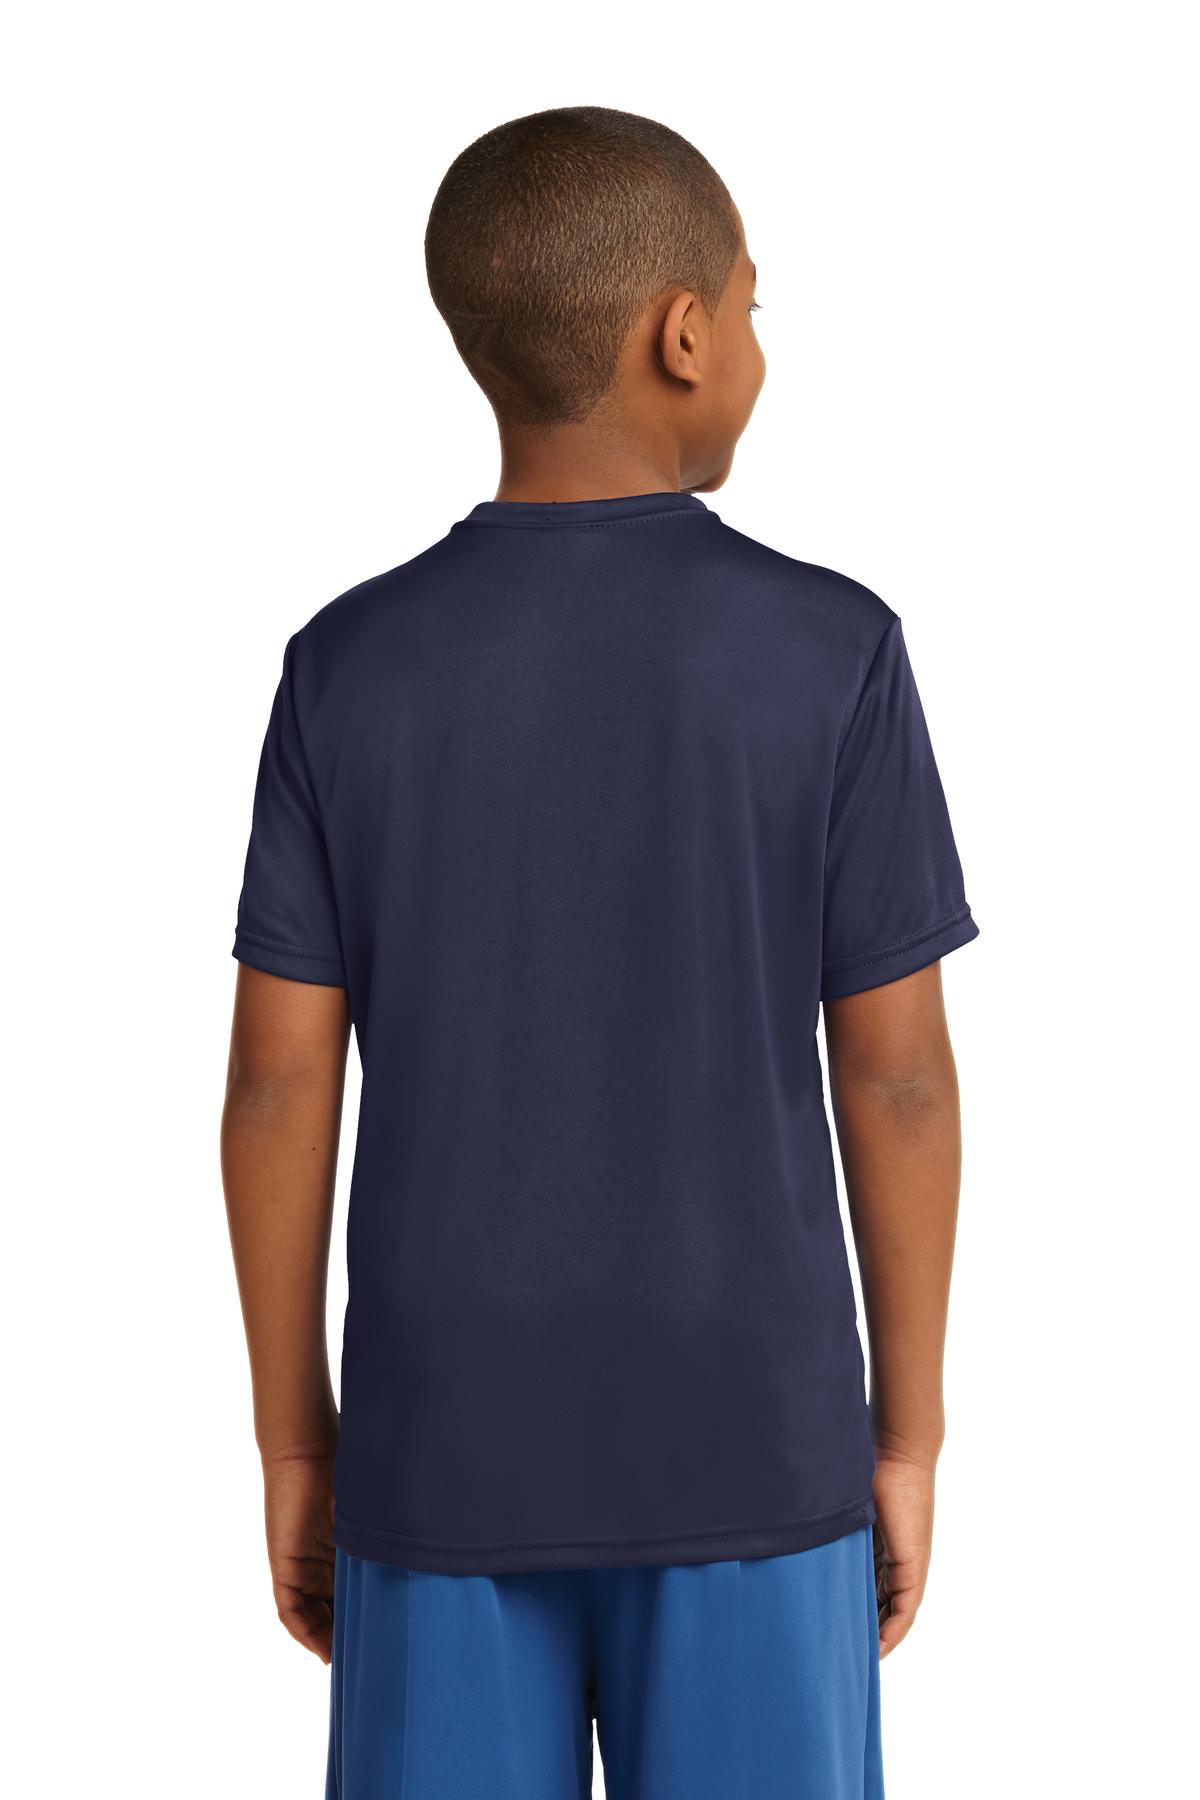 Sport-Tek® Youth PosiCharge® Competitor™ Tee. YST350 [True Navy] - DFW Impression